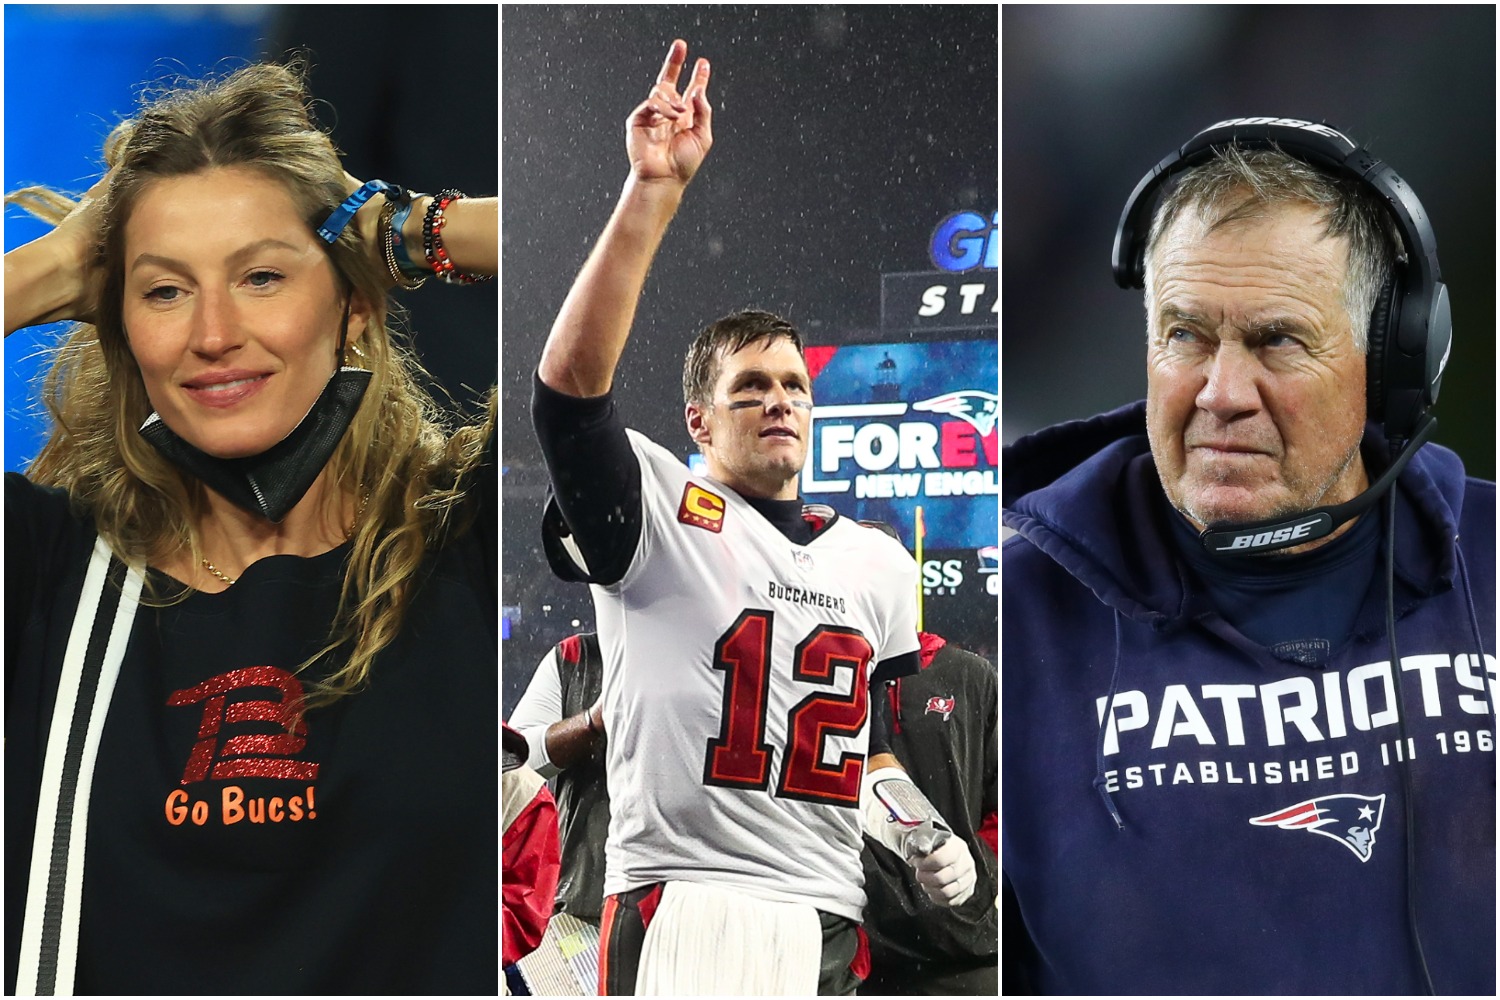 Gisele Bundchen celebrates the Buccaneers winning a Super Bowl as Tom Brady waves to New England Patriots fans and Bill Belichick looks on during a game.